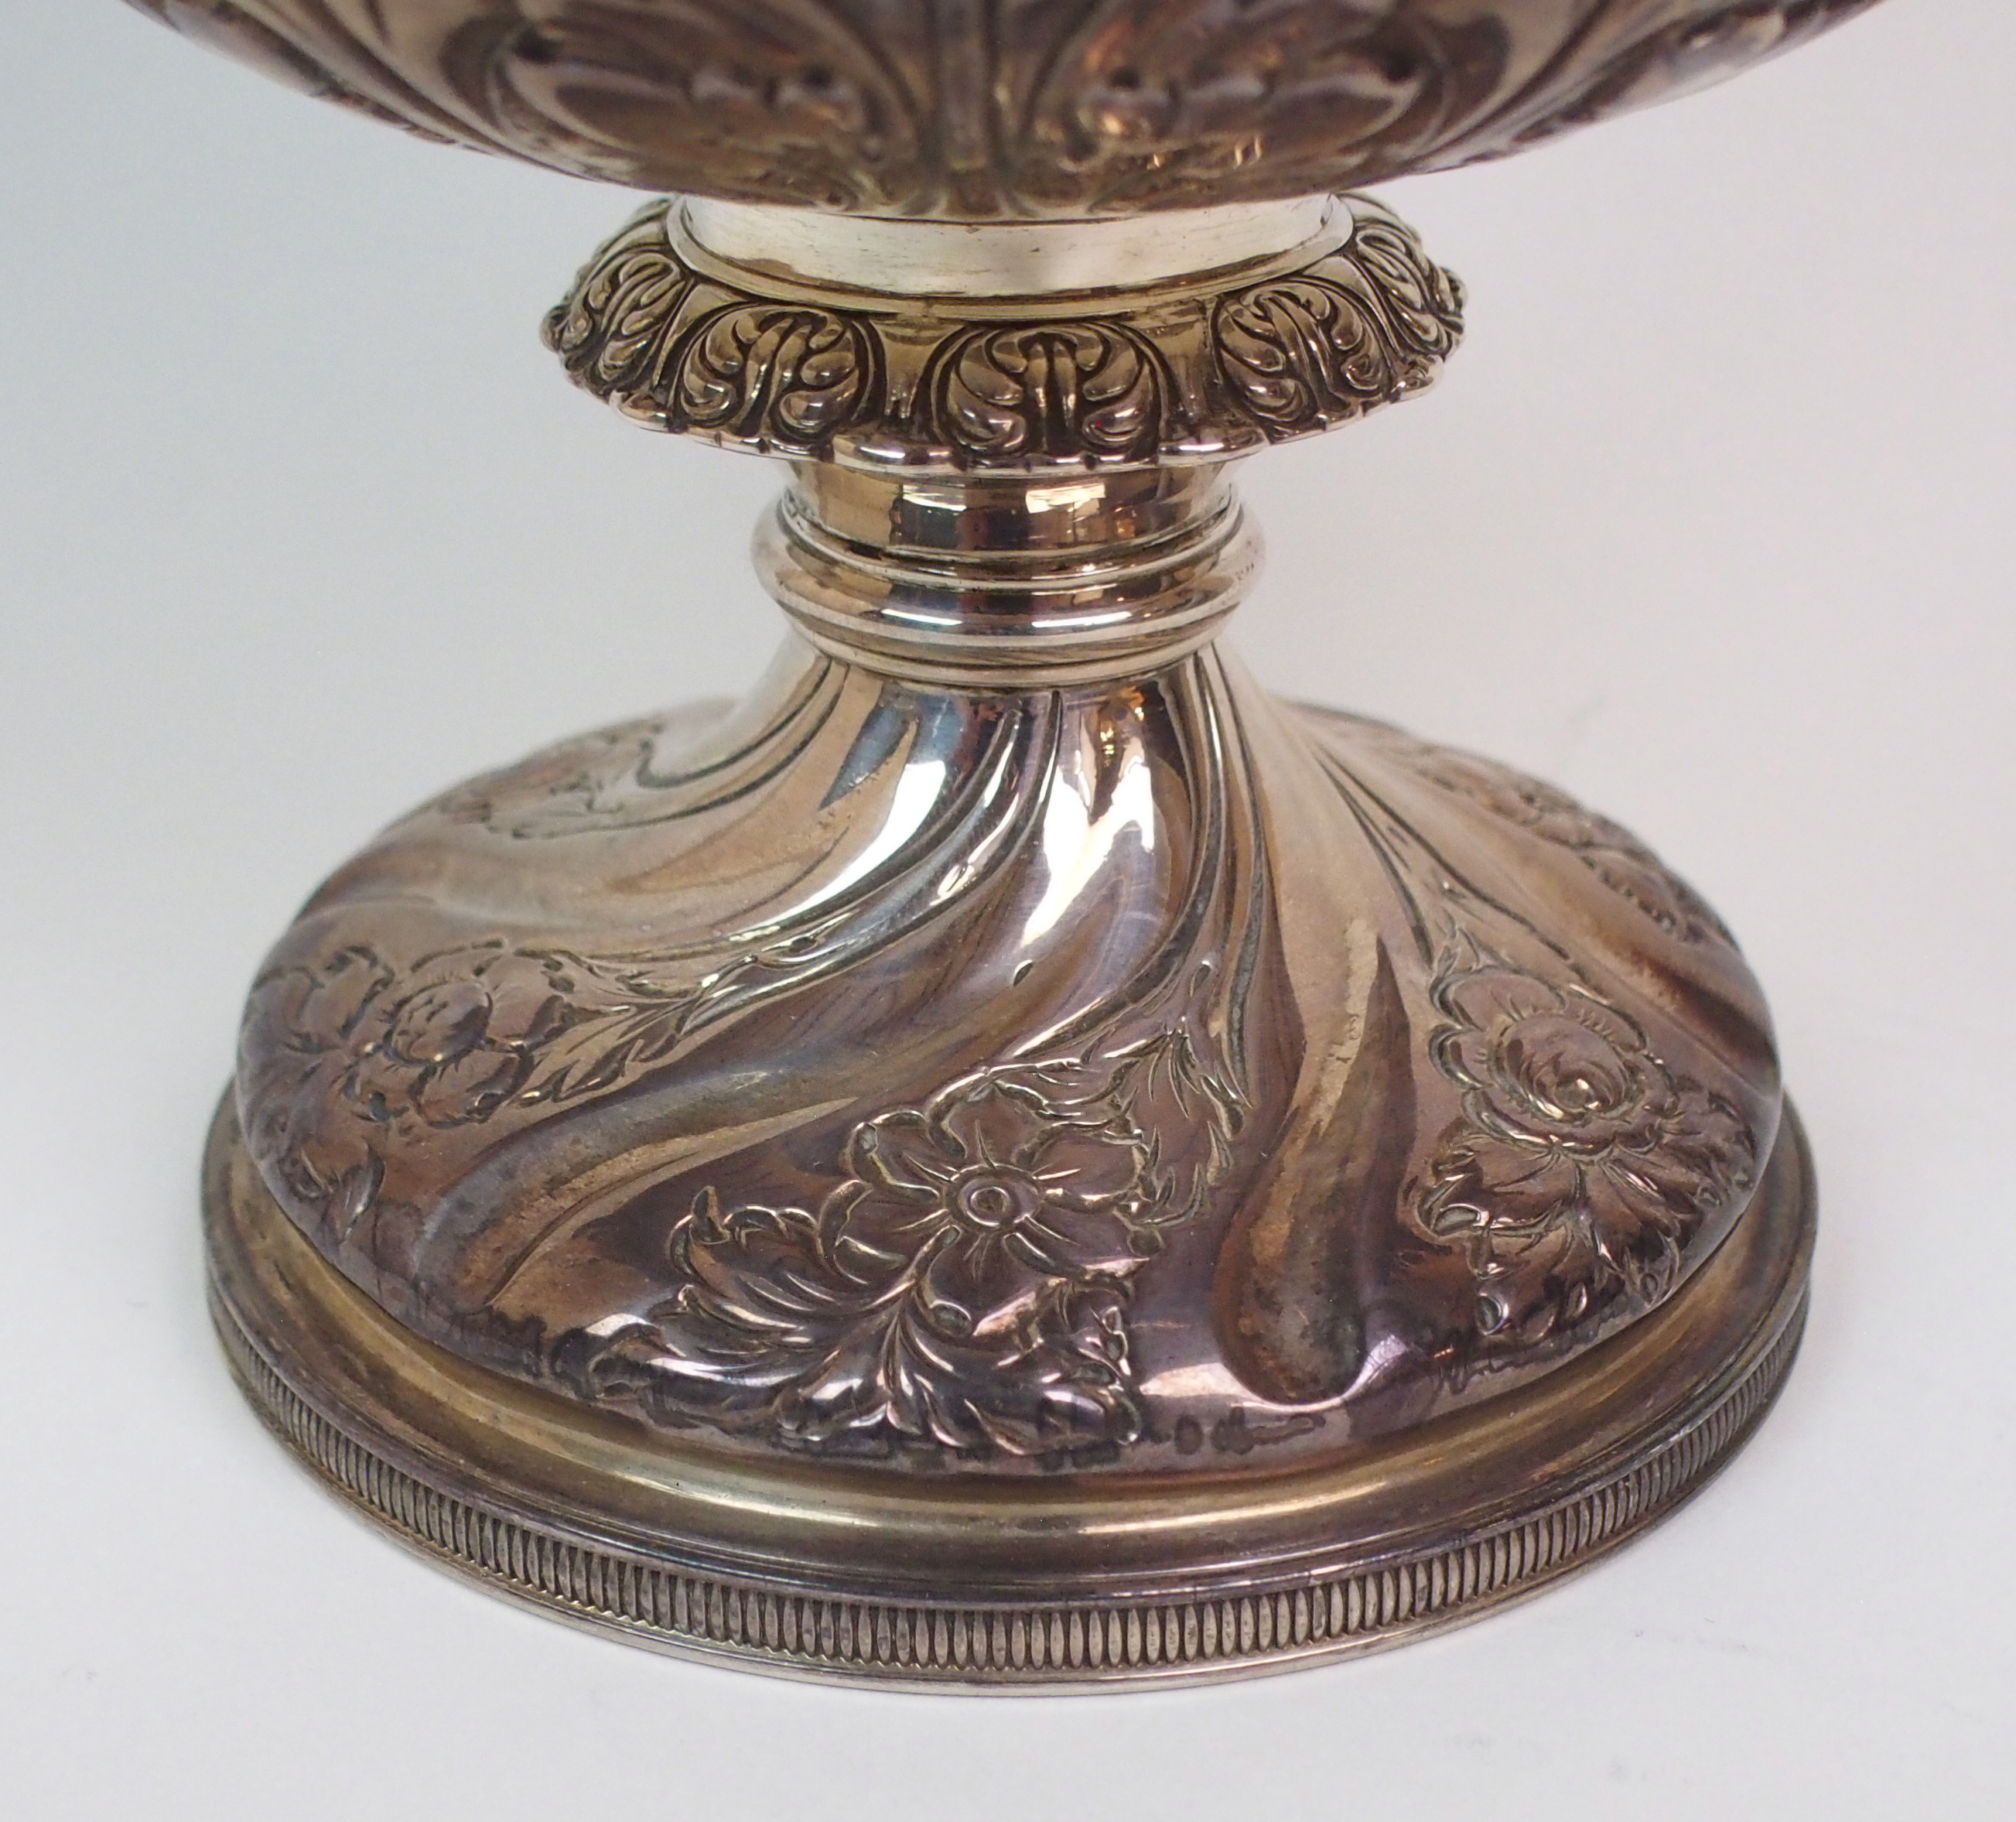 A LATE GEORGE III SILVER TROPHY CUP possibly by Alexander Edmondstoun III, Edinburgh 1817, of - Image 8 of 10